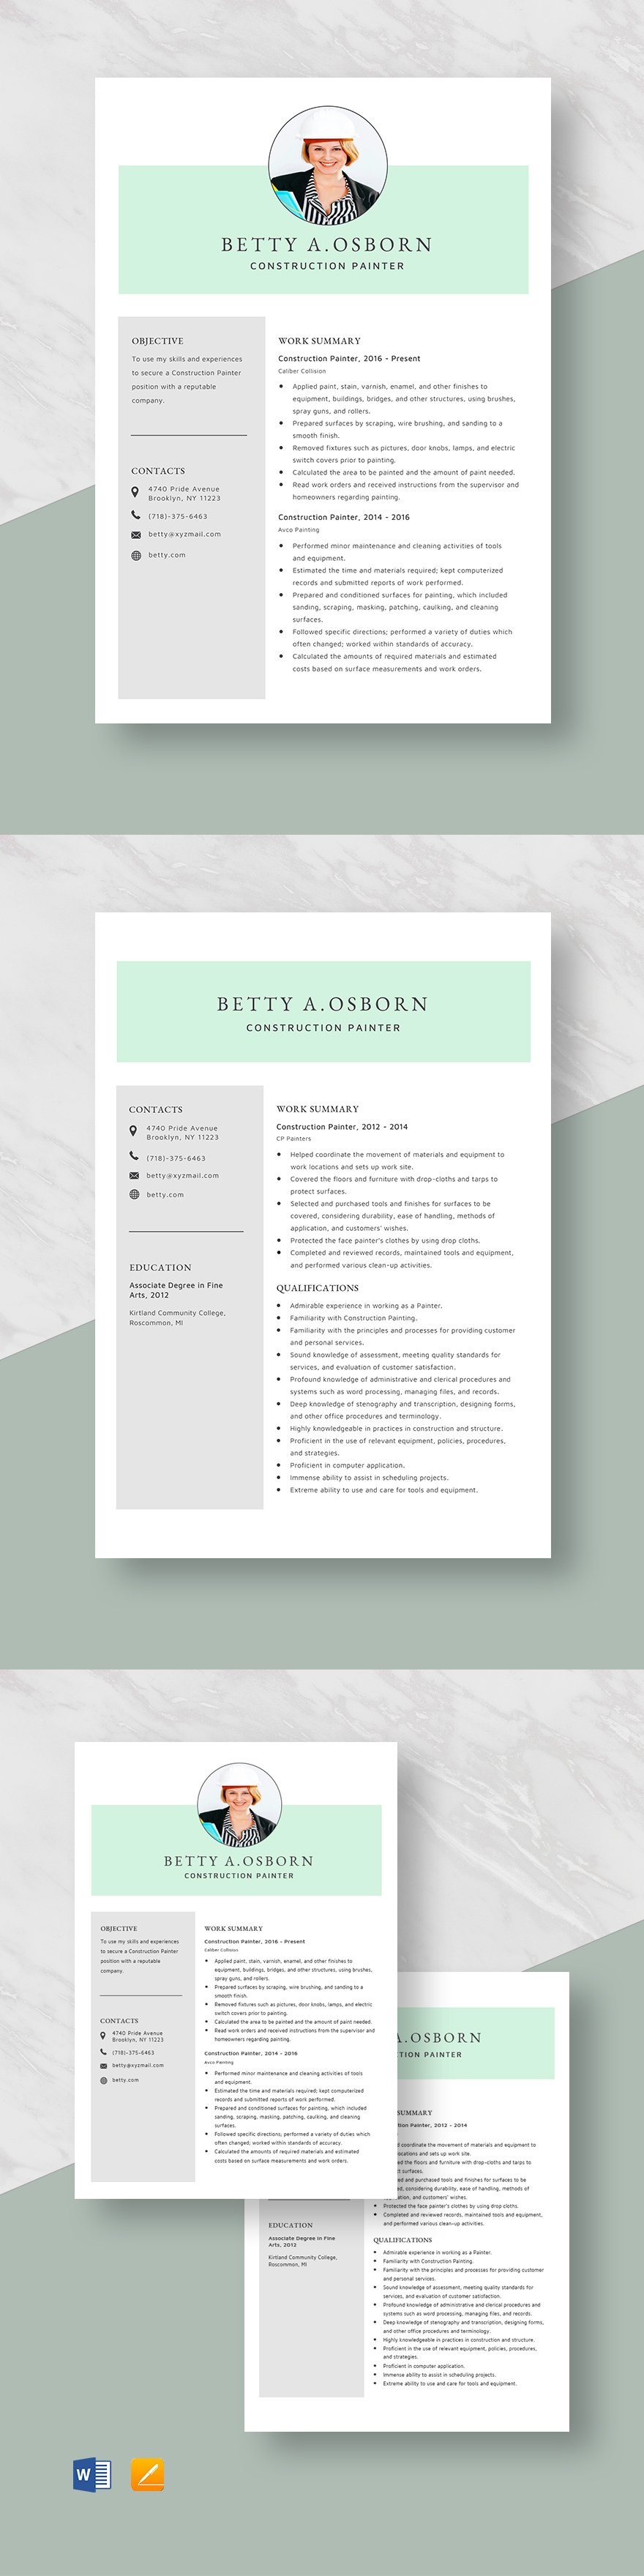 Construction Painter Resume Template Word Apple Pages Template net